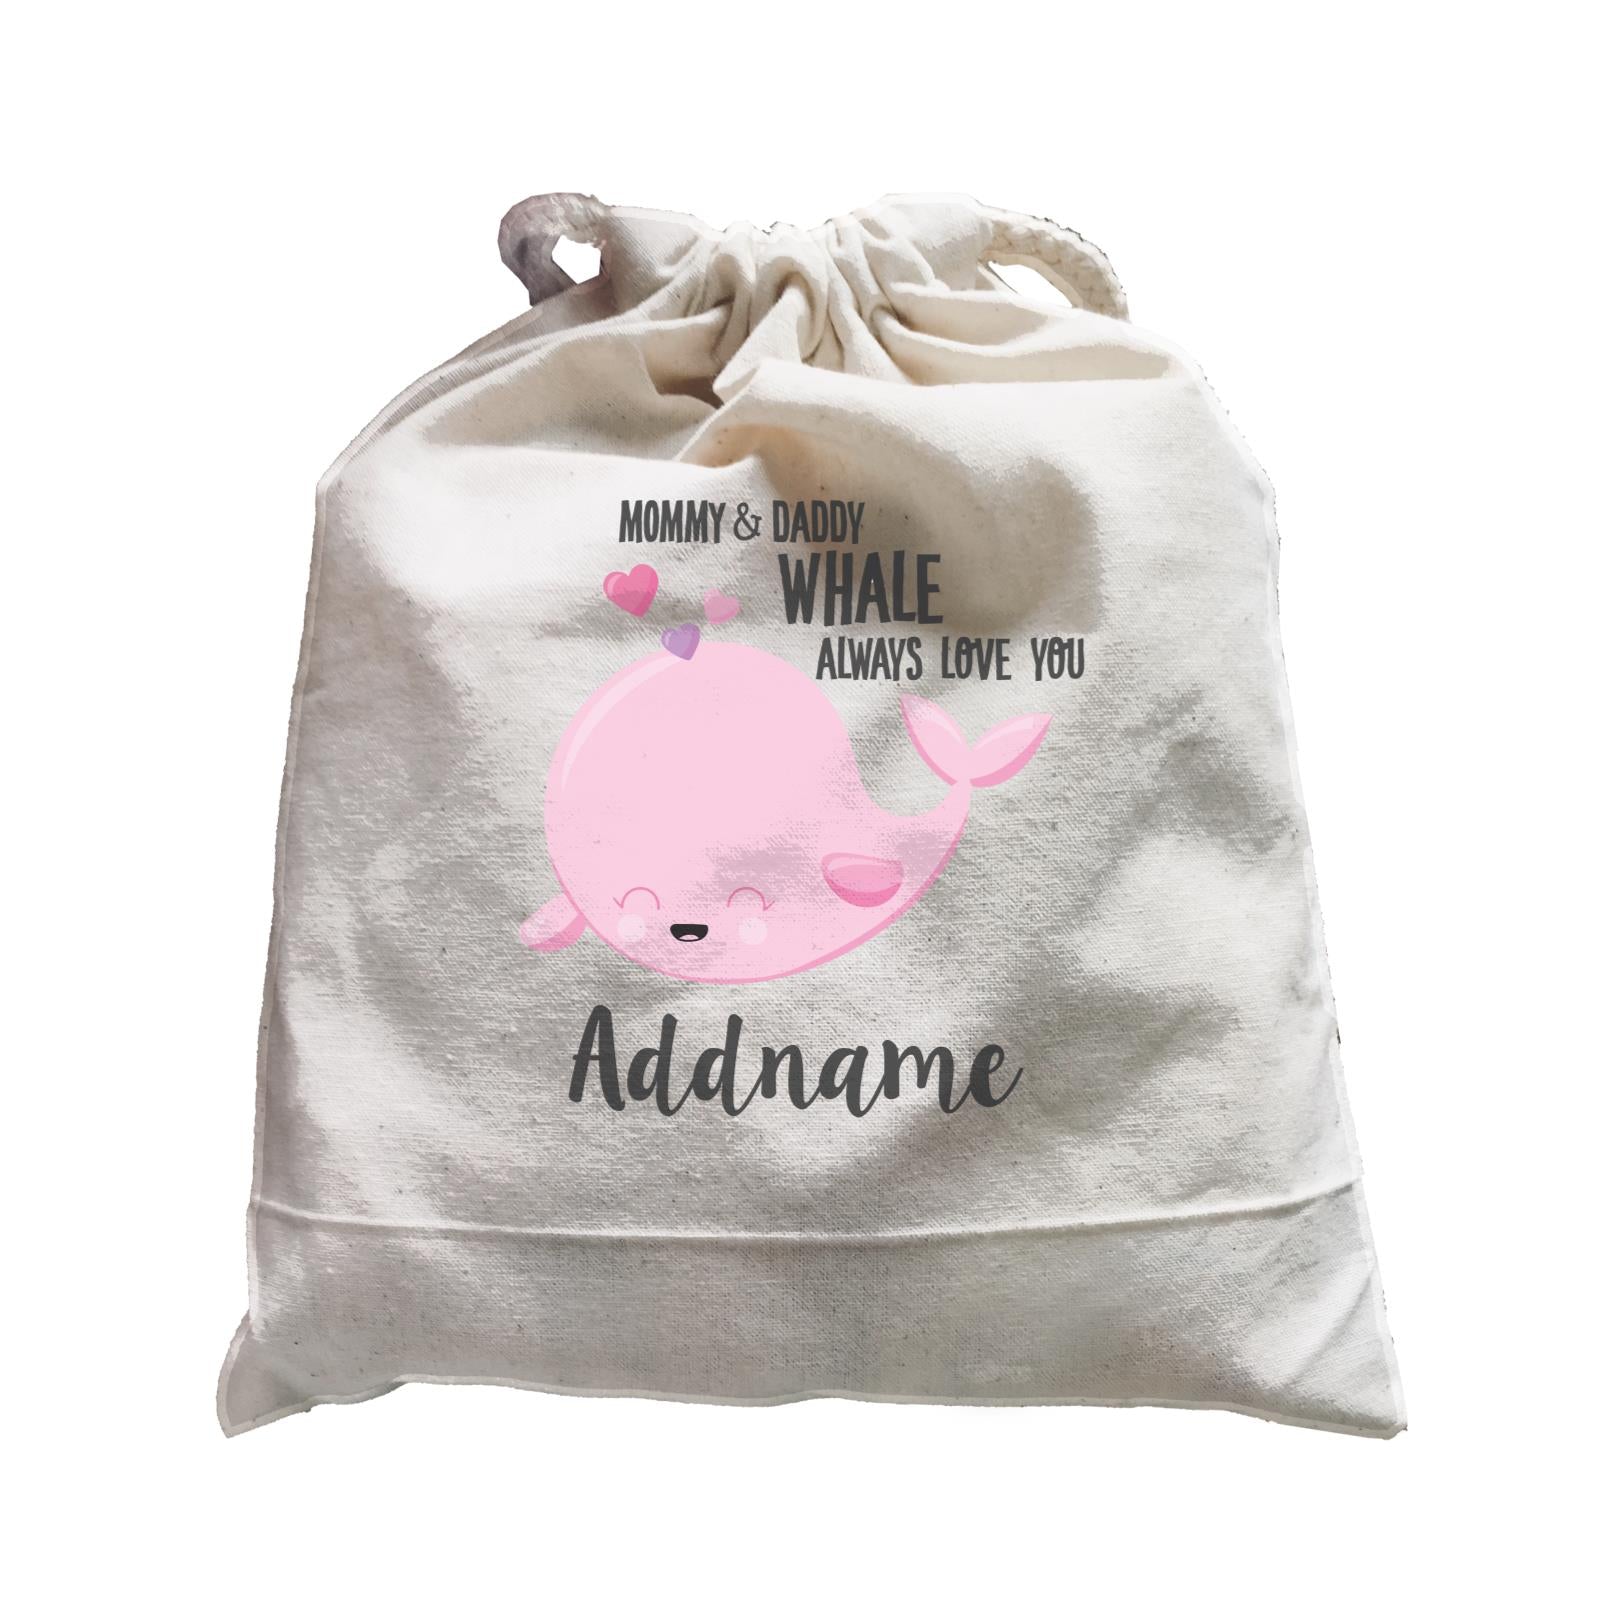 Cute Sea Animals Mommy & Daddy Whale Always Love You Addname Satchel